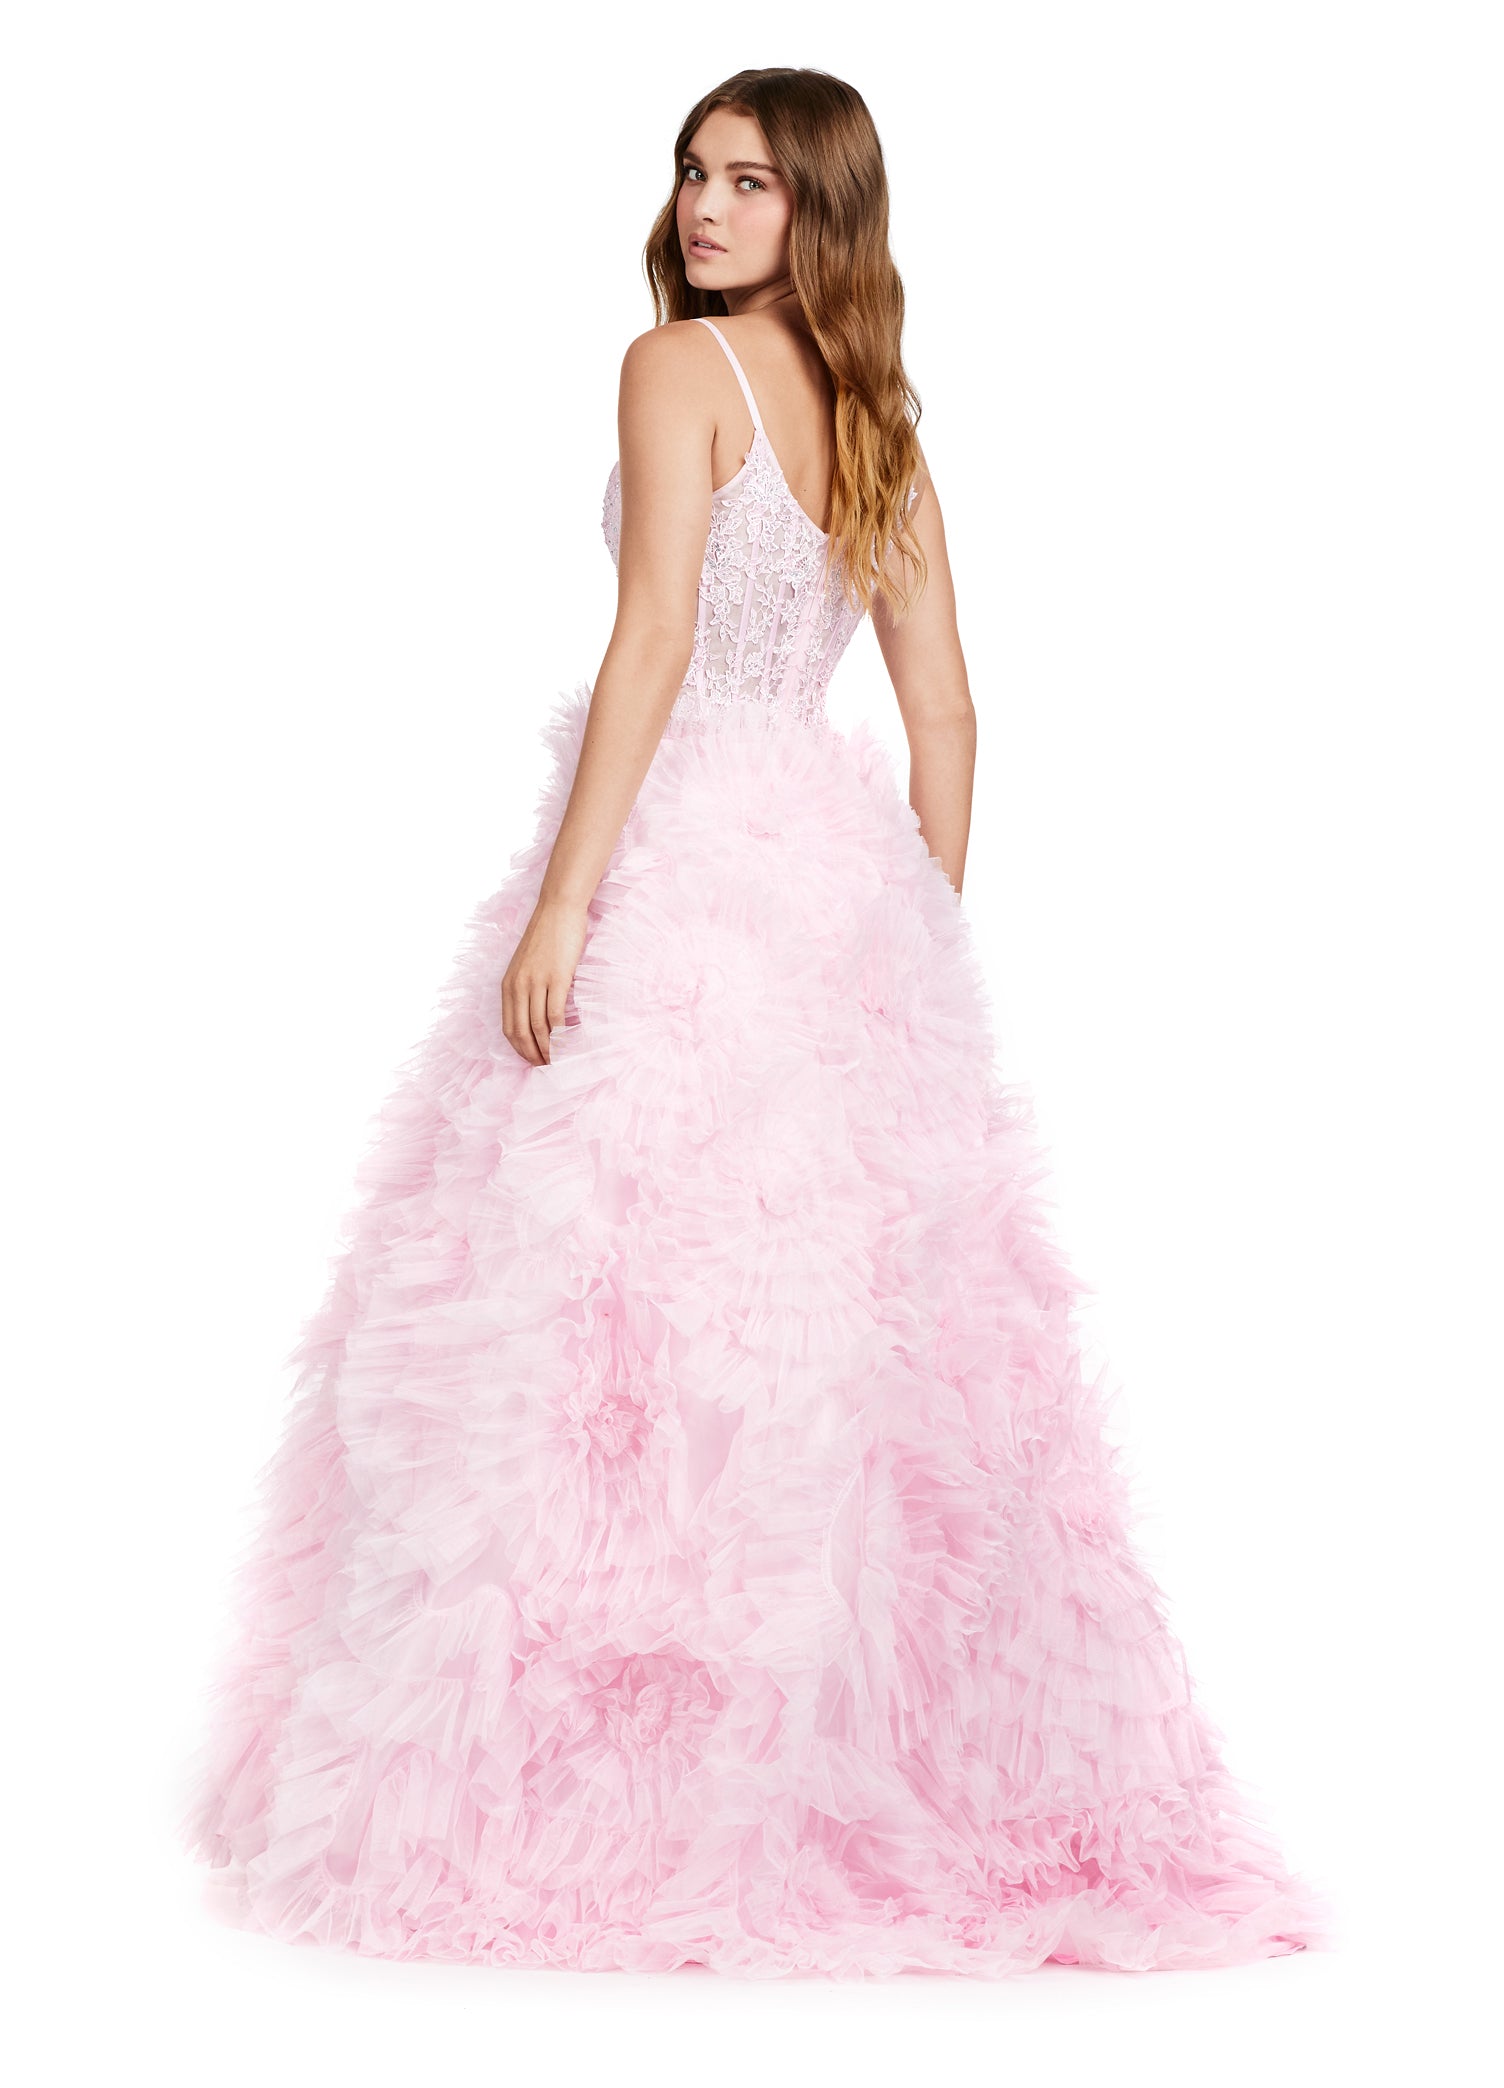 Go all out in this stunning Ashley Lauren 11446 Long Prom Dress. With a flattering spaghetti strap V-neck design and a dramatic tulle ruffled skirt, this gown will make you stand out at any formal occasion. Perfect for proms, pageants, and more. Feel confident and elegant in this beautiful dress. Looking for a dress that will WOW? Look no further! This luscious gown has a full tulle ruffled skirt and a deep V-neck. You're sure to stand out in this!